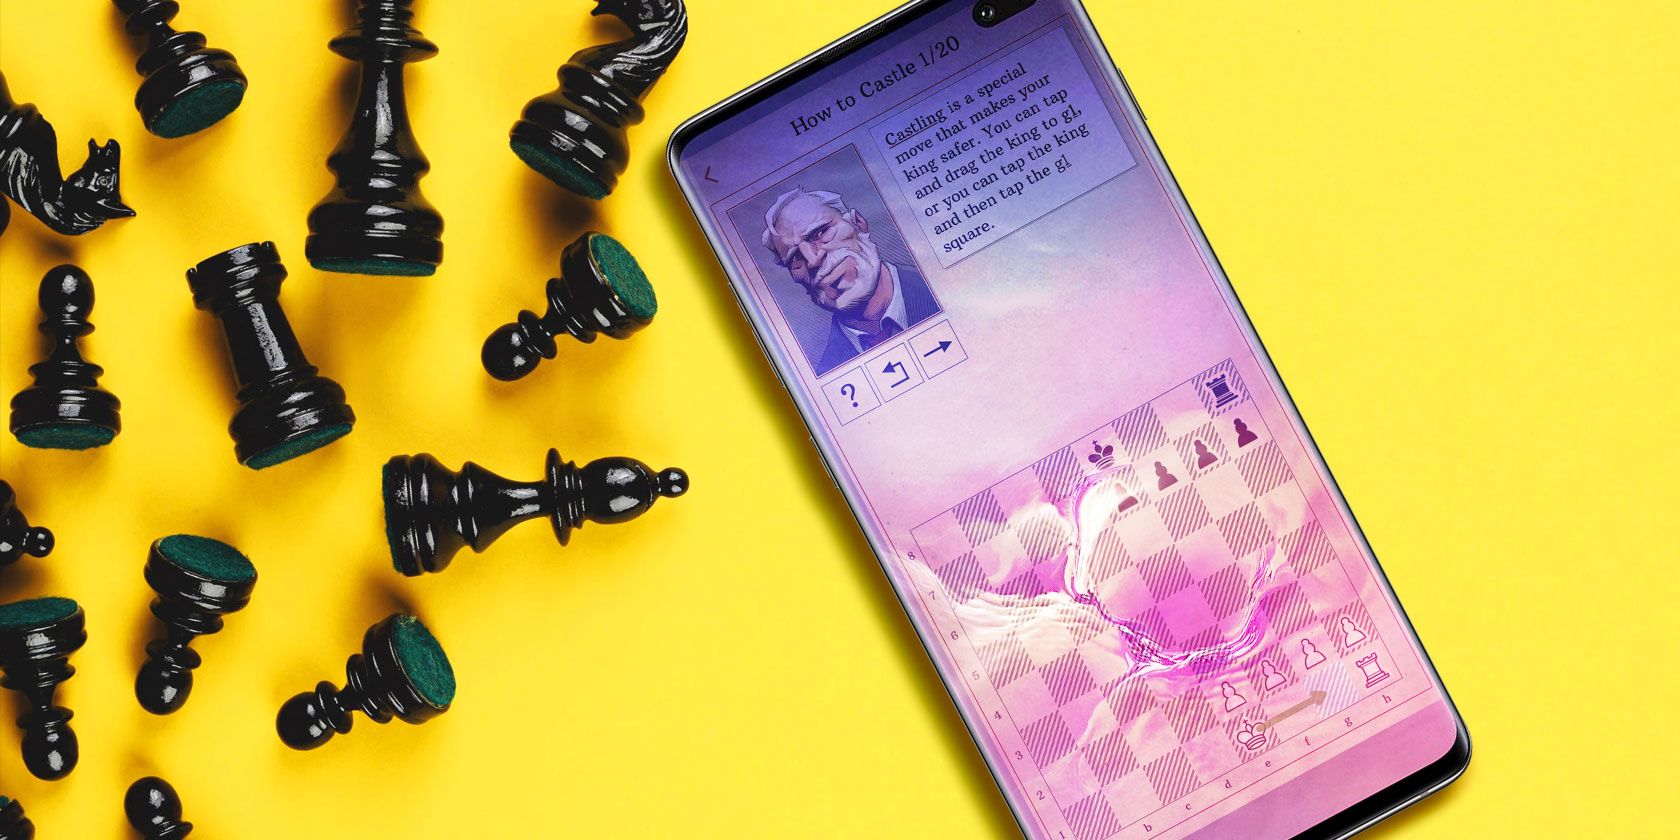 Chess Move mobile android iOS apk download for free-TapTap